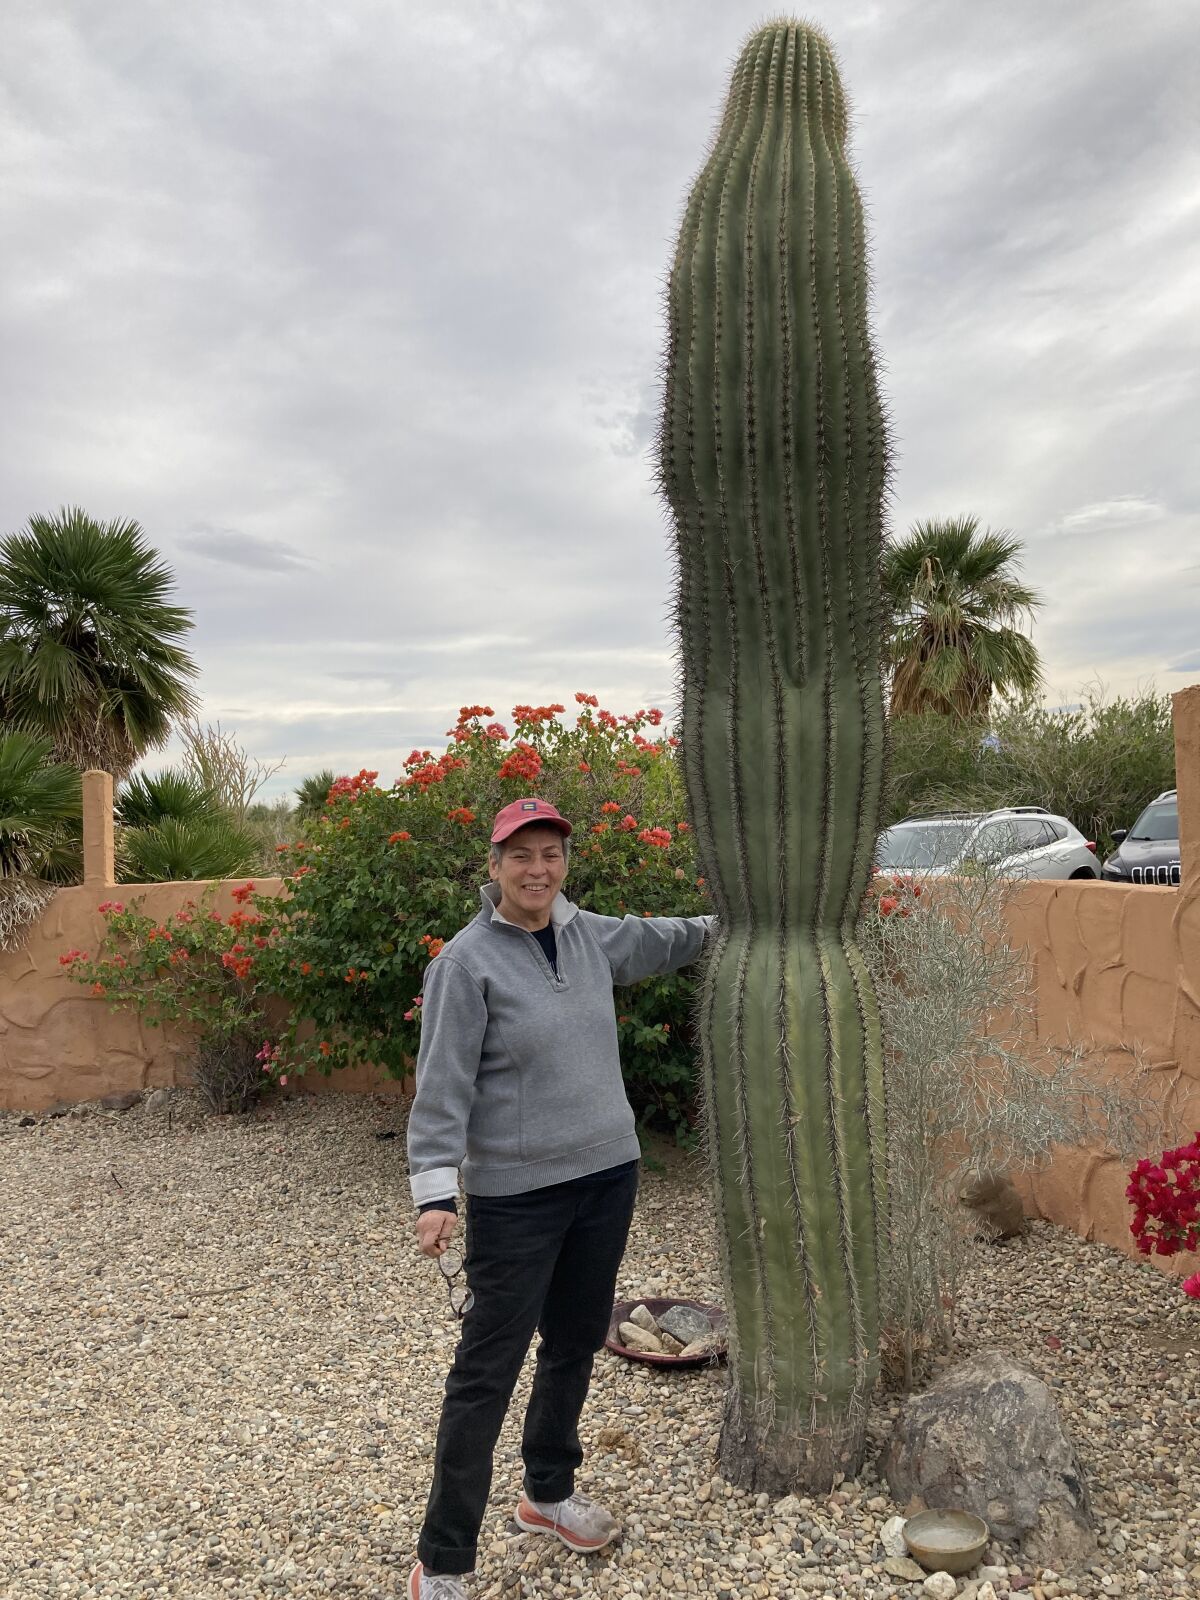 A woman stands next to a large cardon cactus at a desert home.